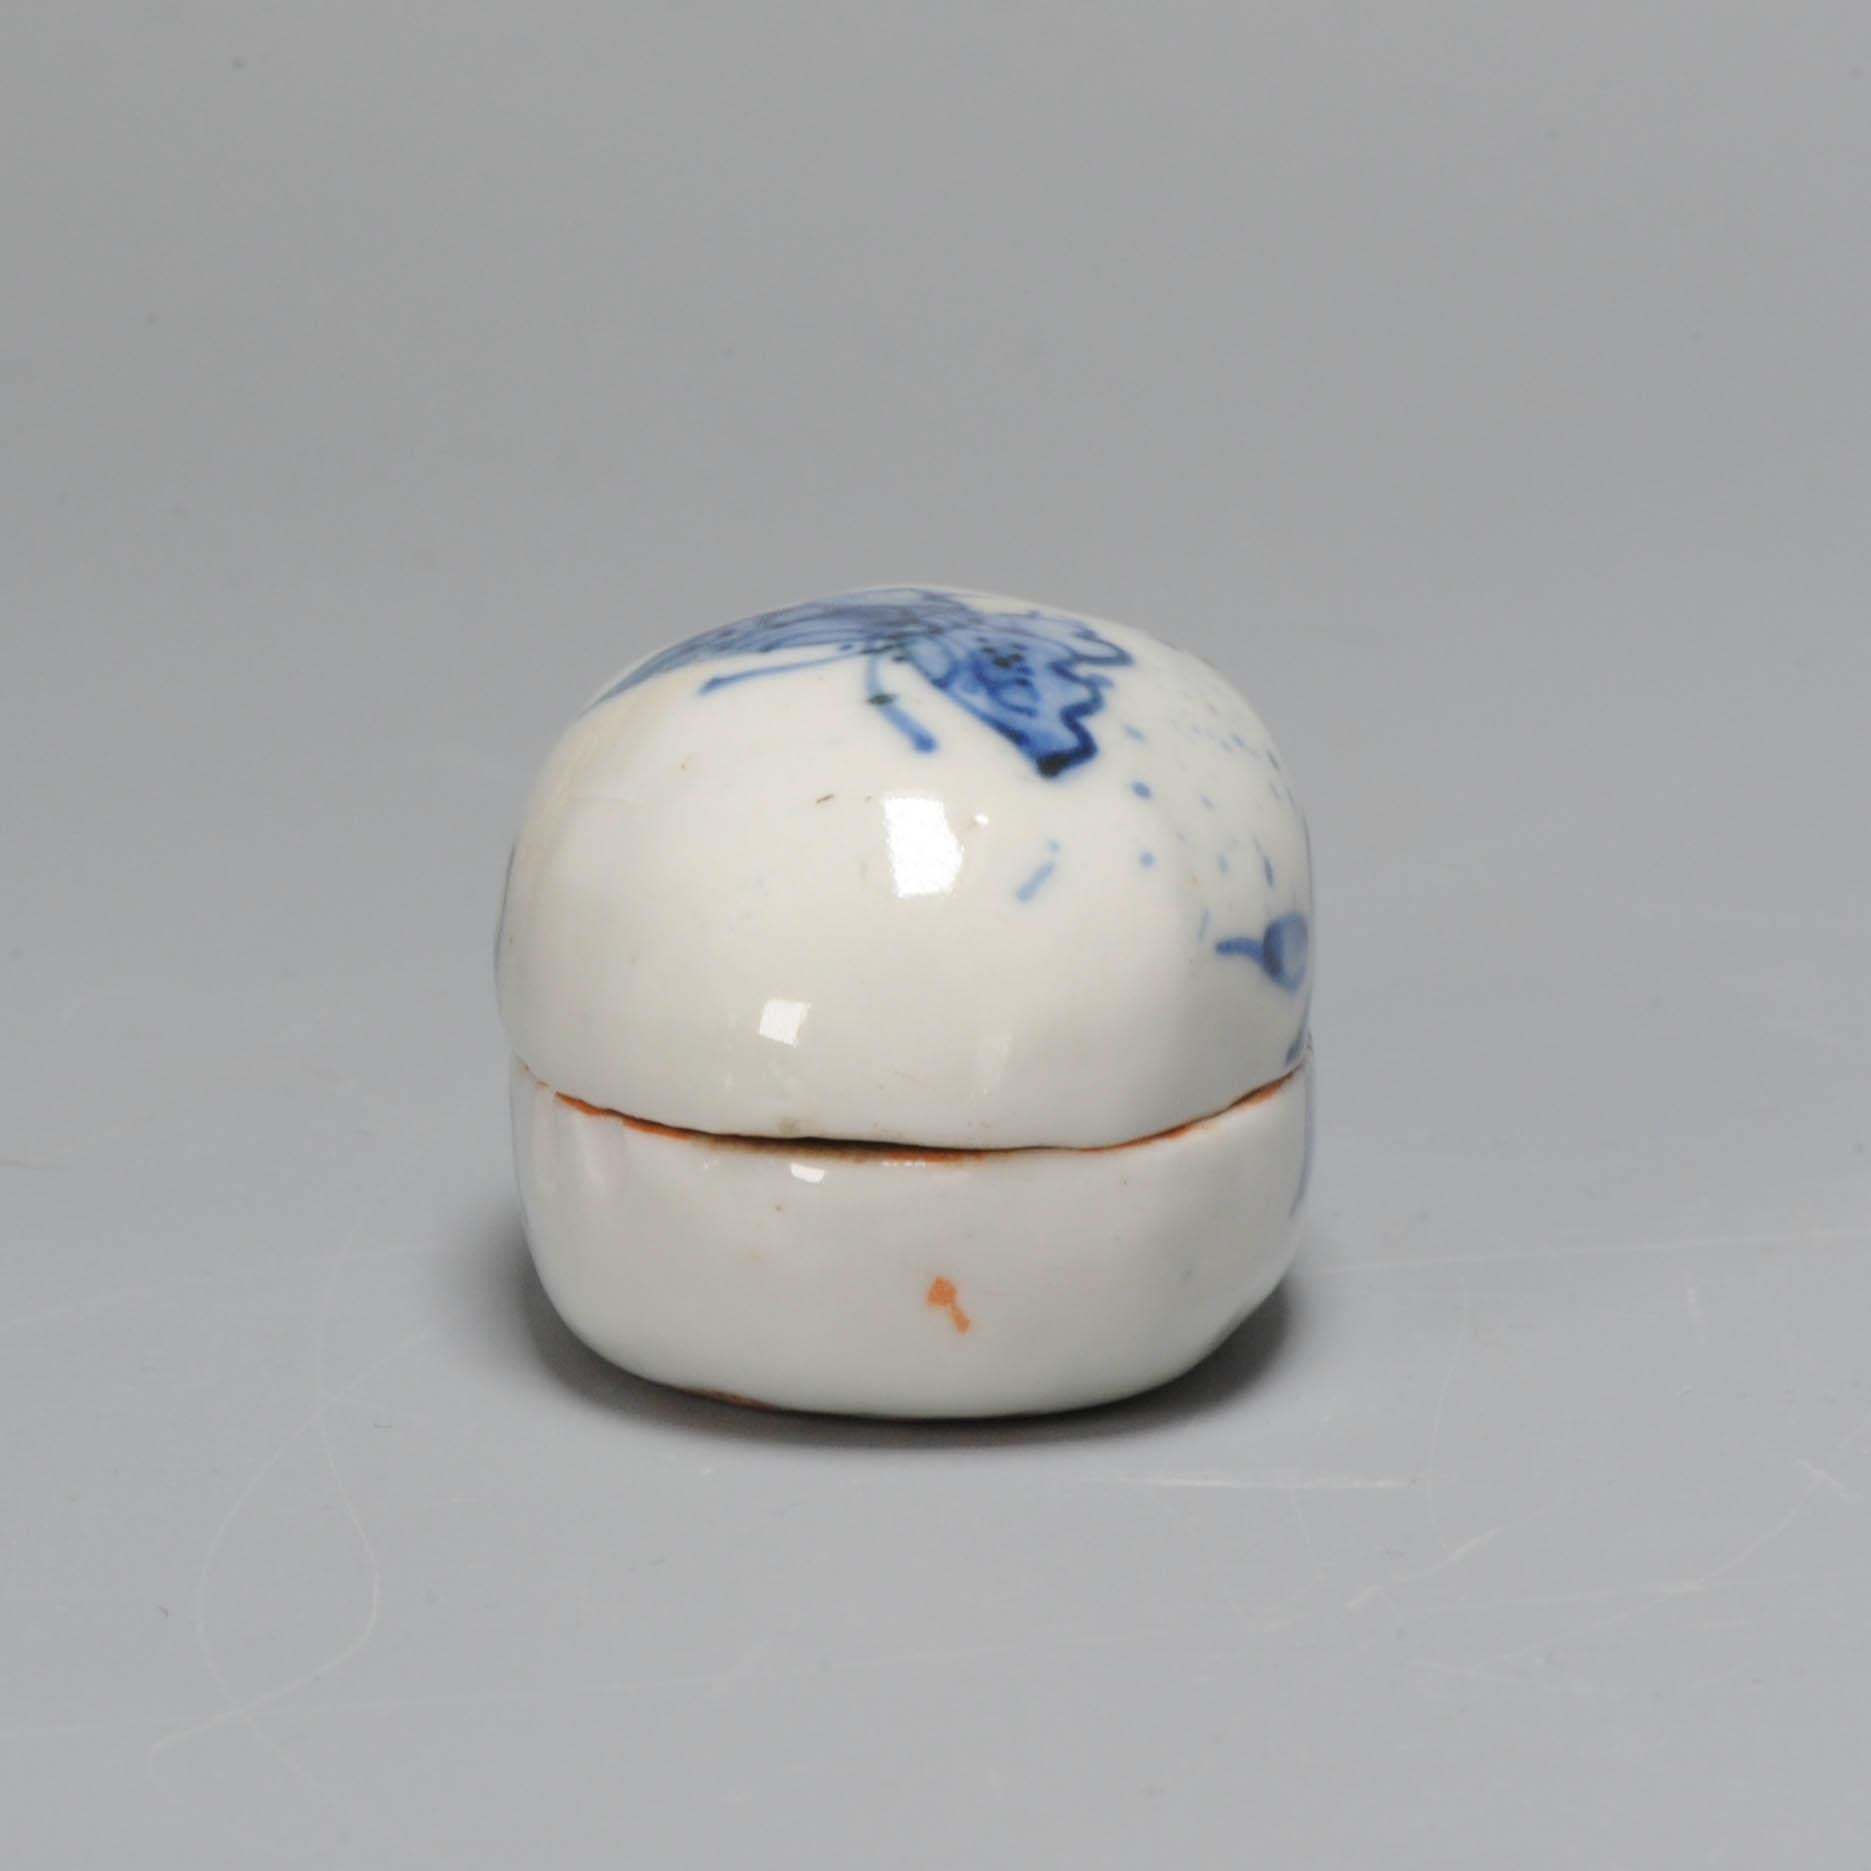 Rare Ca 1600 Chinese Porcelain Ming Period Kosometsuke Incense Box Fruit For Sale 3